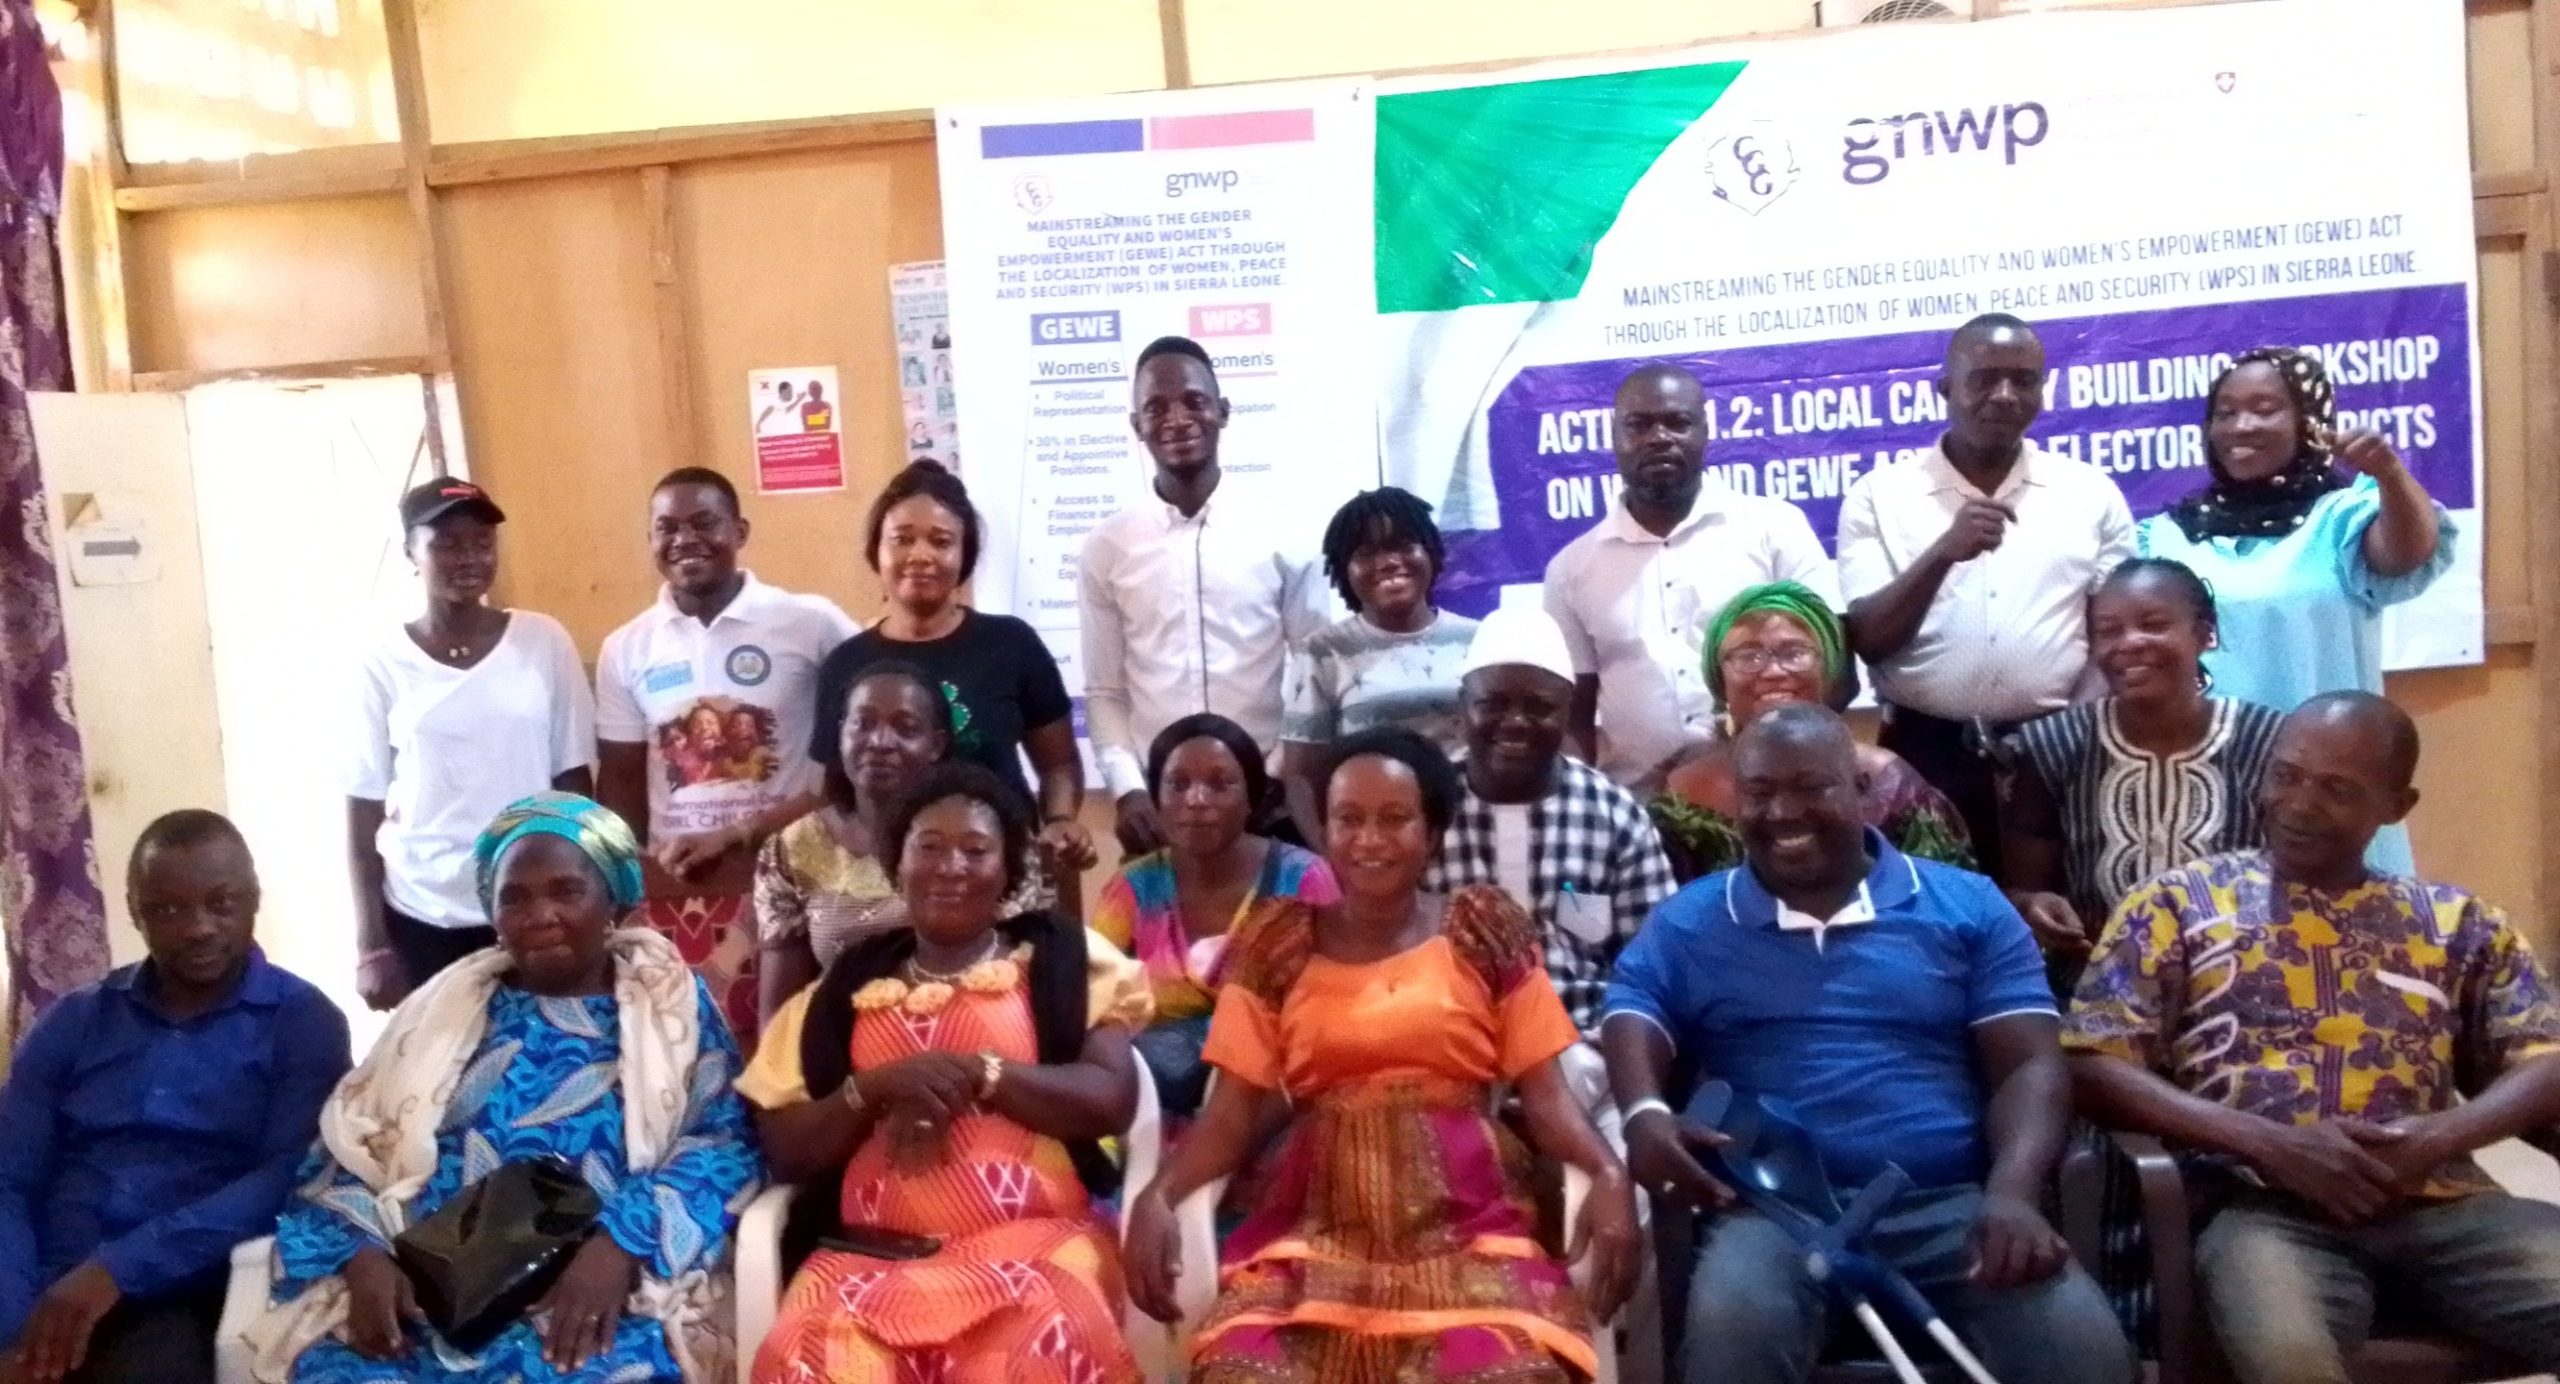 GNWP Holds One Day Workshop in Kailahun